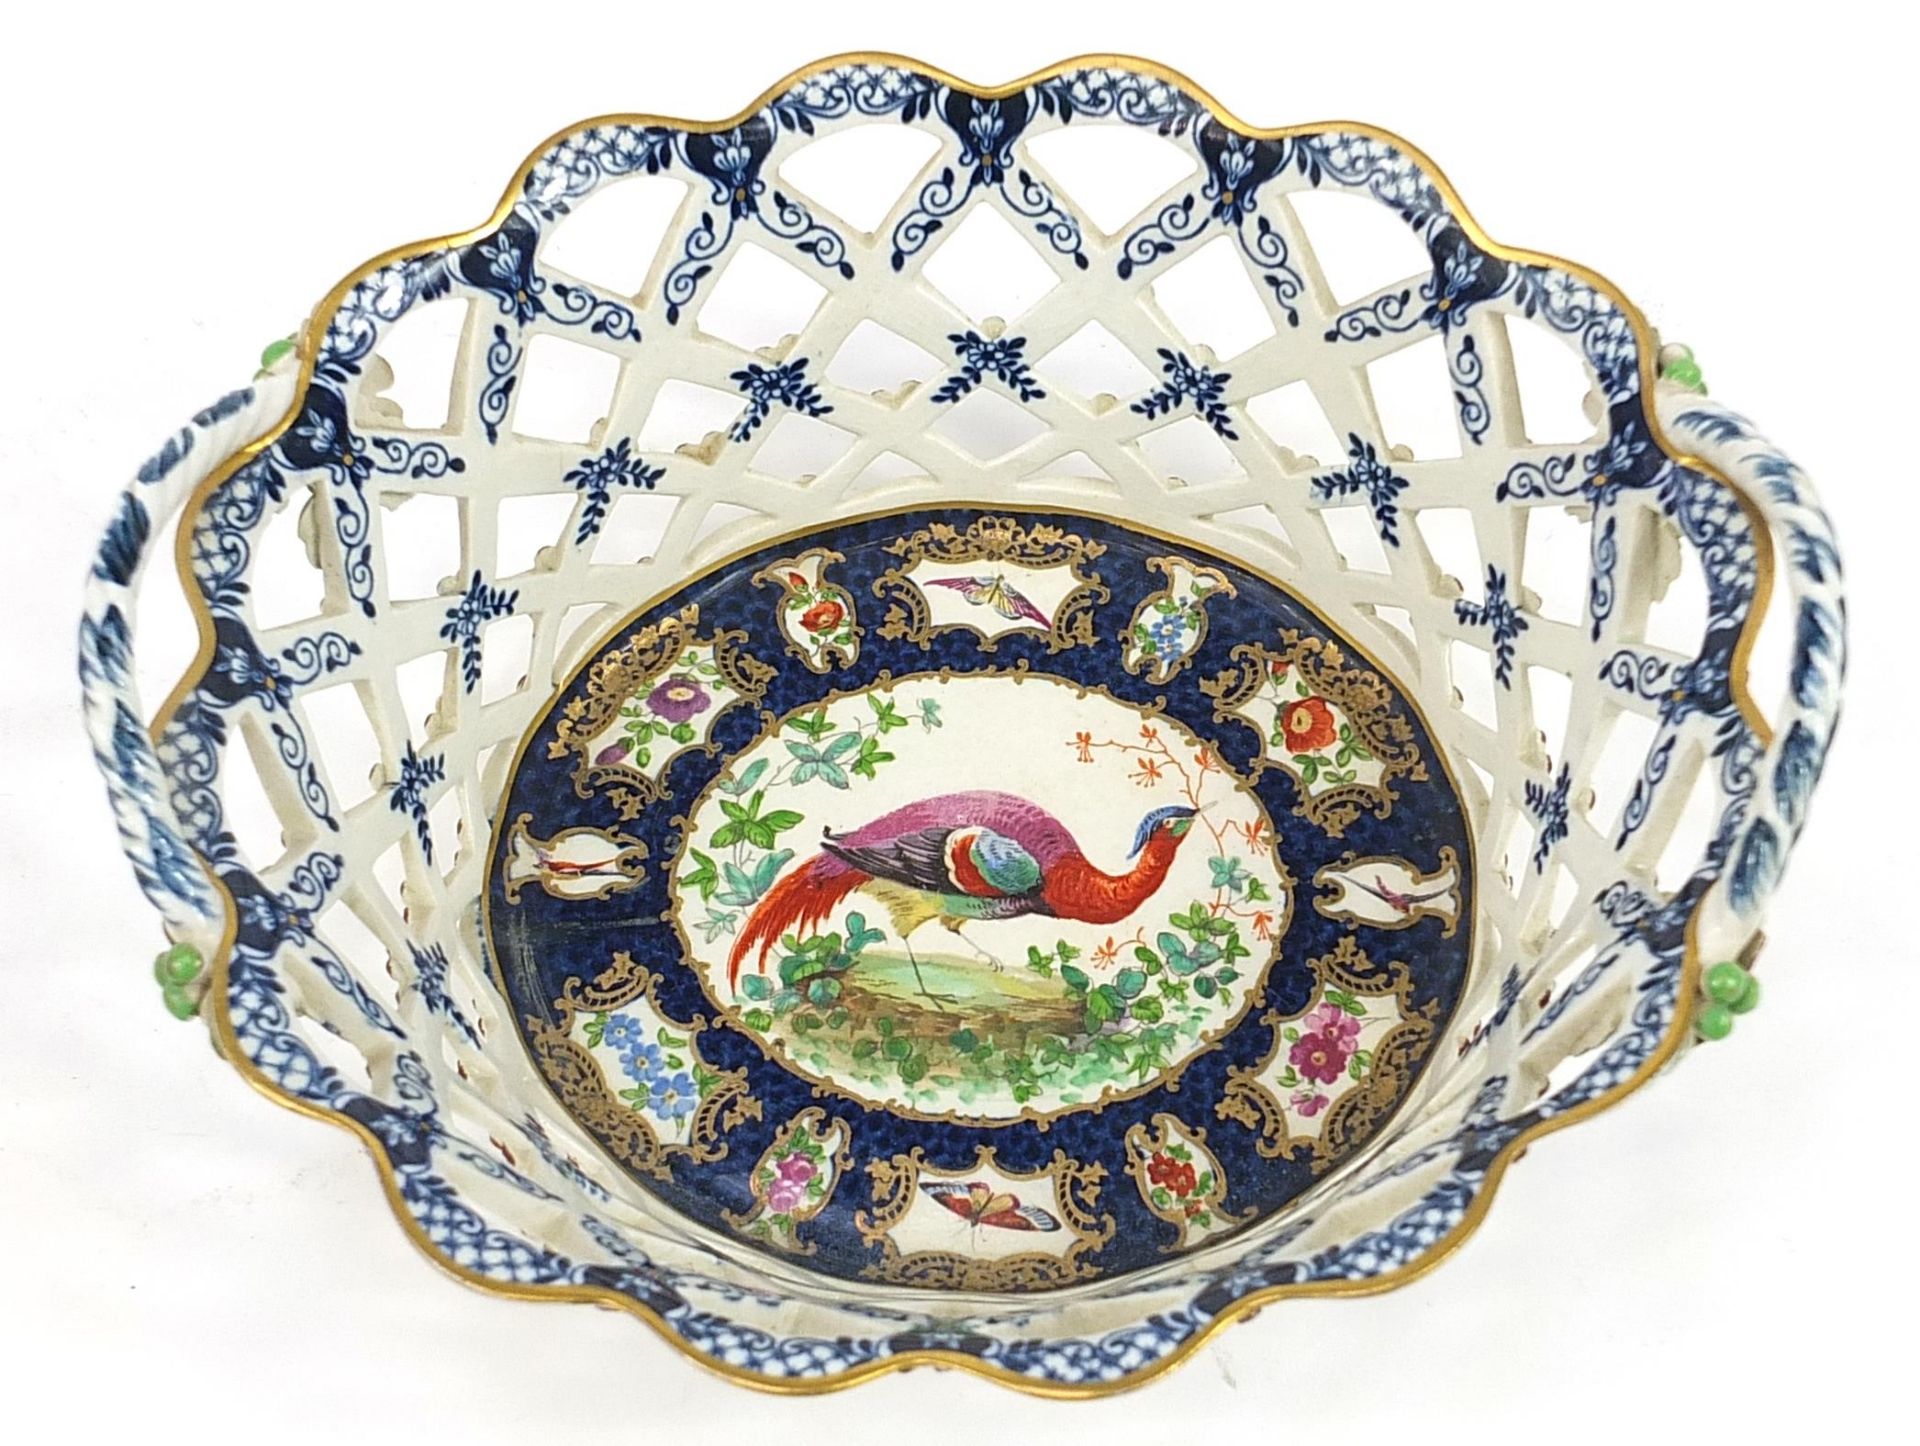 18th/19th century porcelain basket hand painted with birds of paradise and insects in the style of